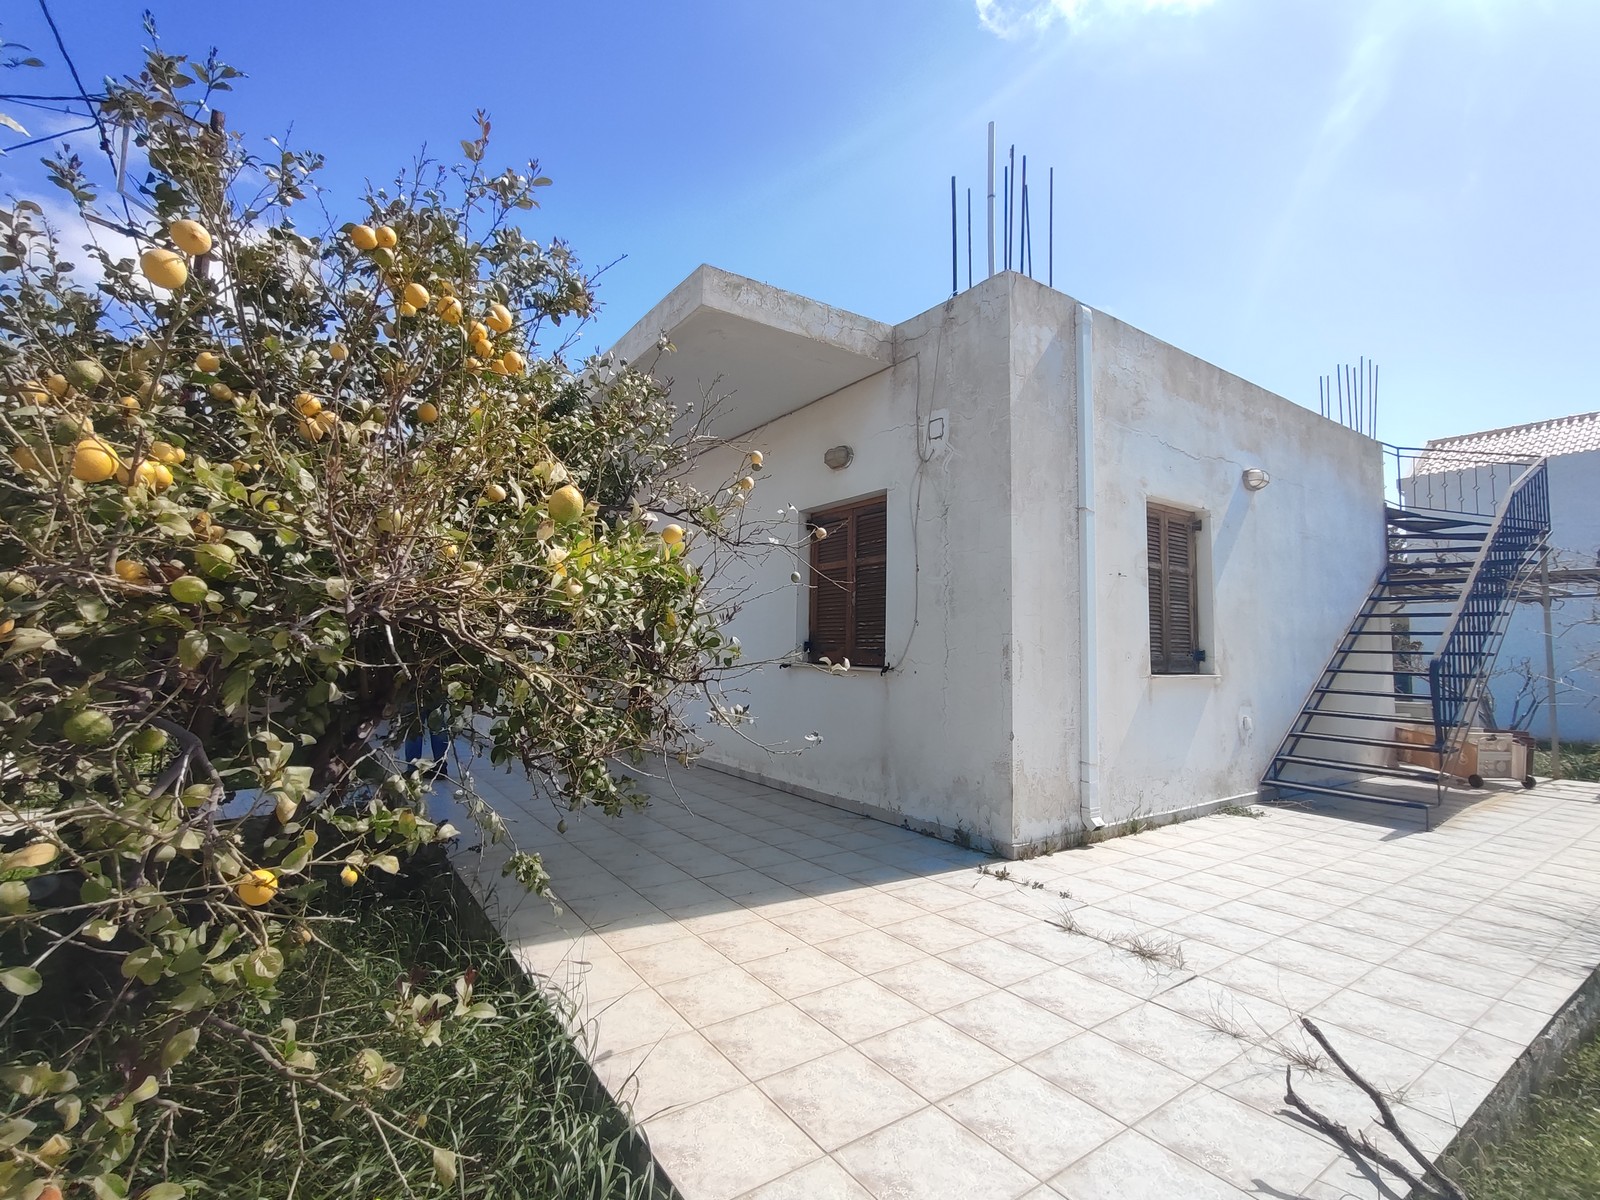 Detached house 80m2 on a plot of 512m2. Just 120 meters from the beach.